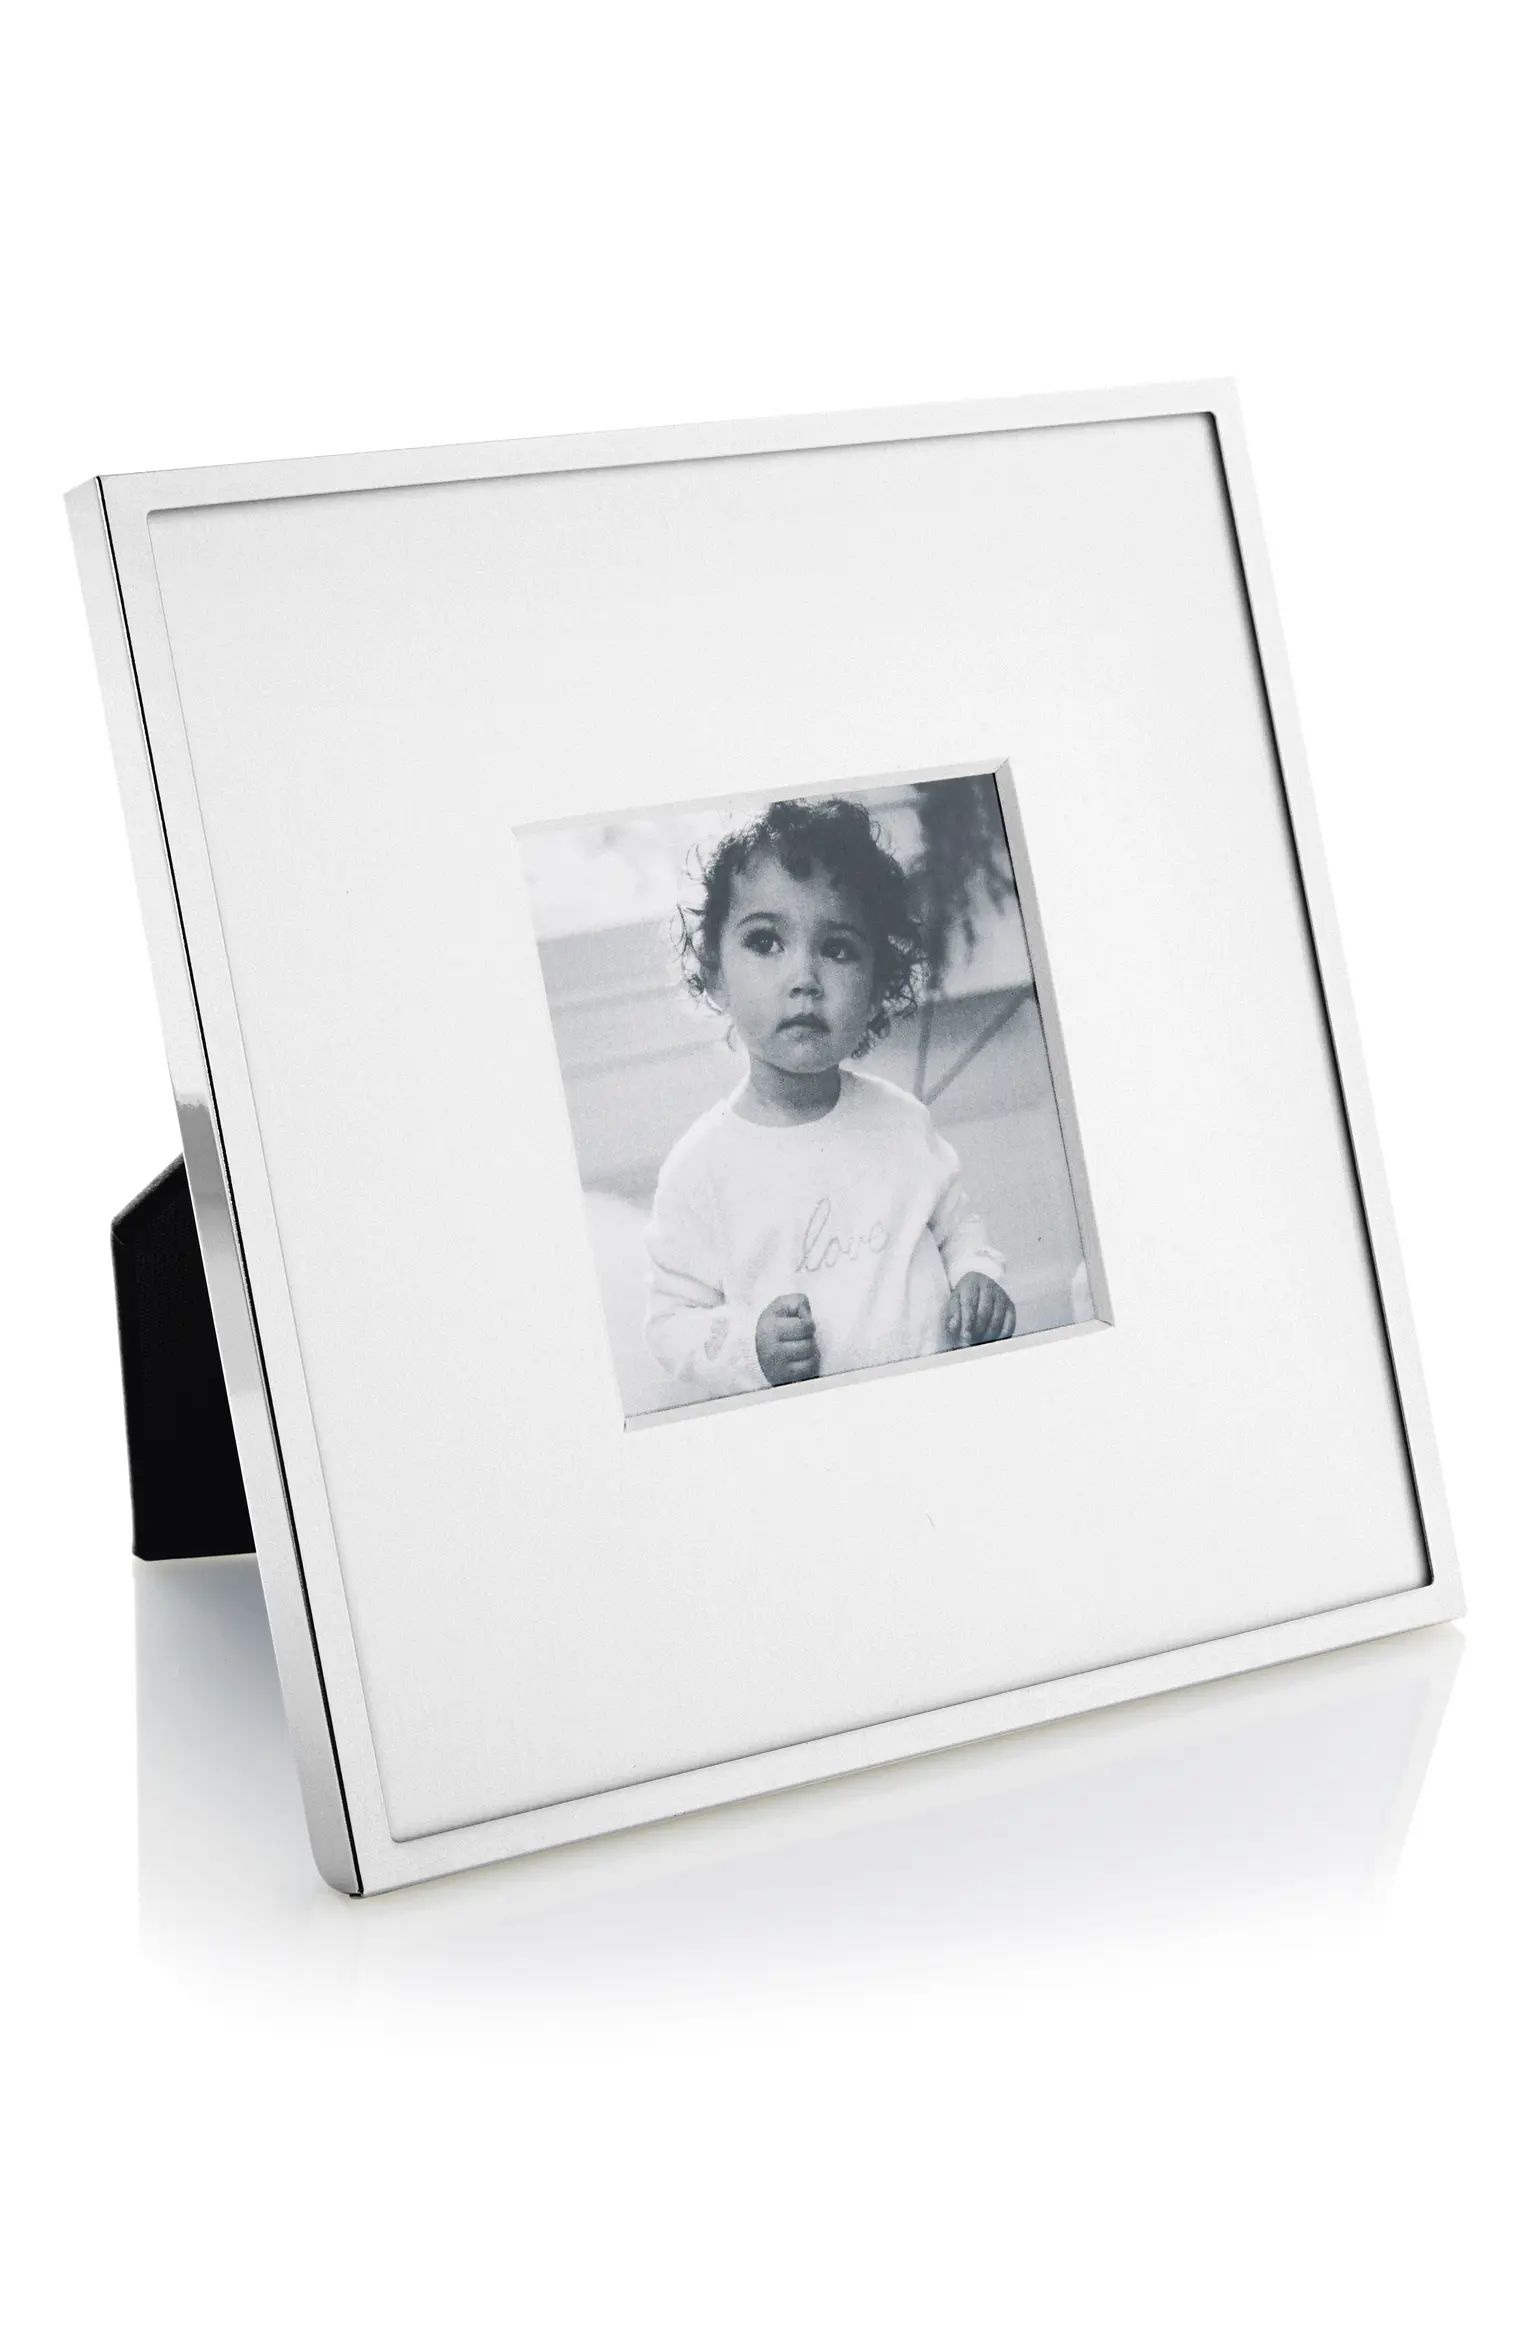 Fine Silver Plated Picture Frame | Nordstrom